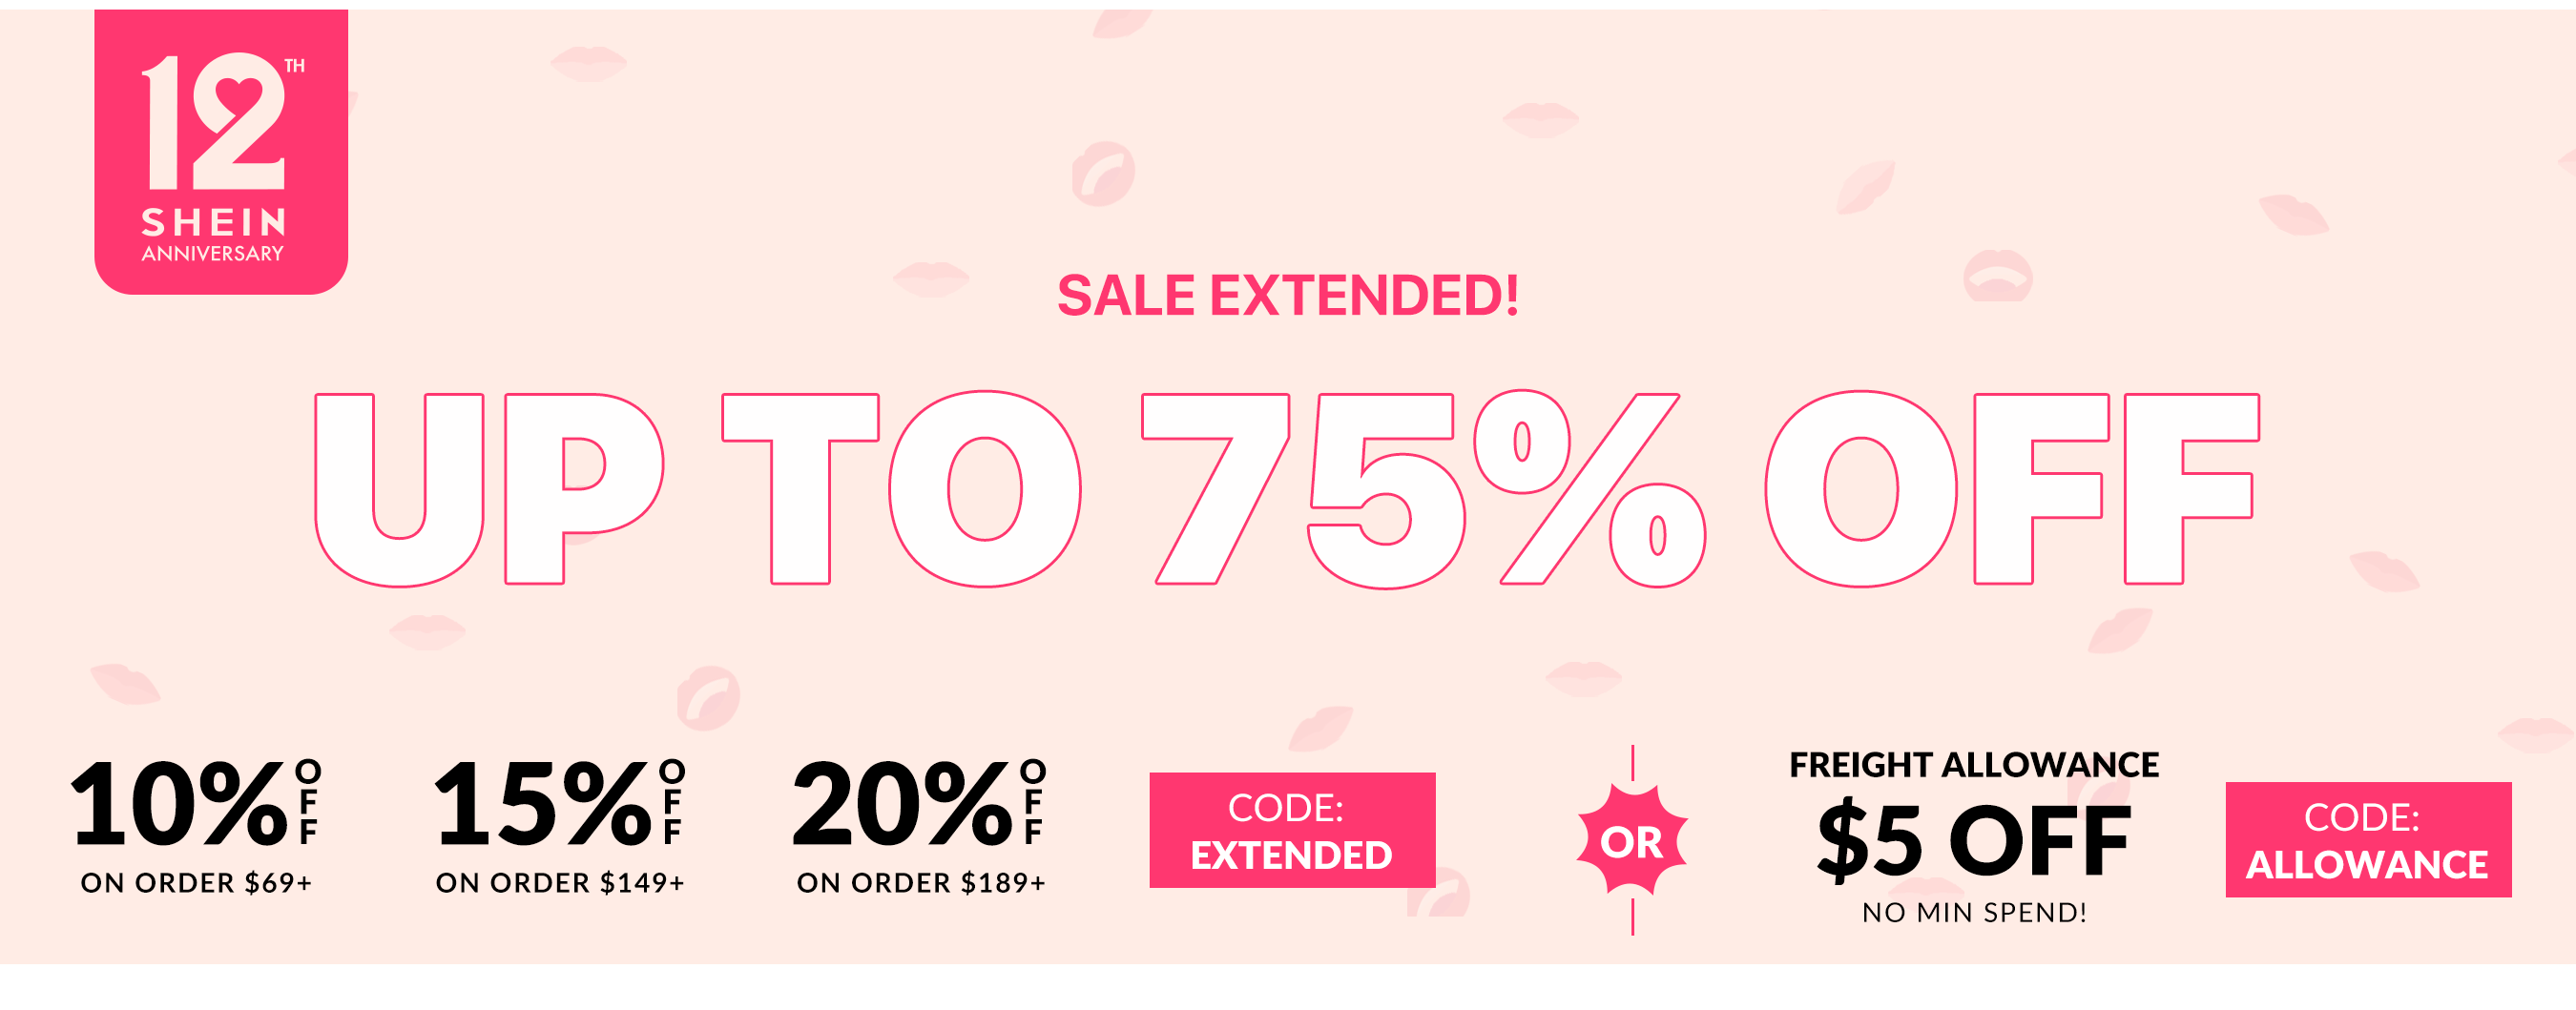 Grab Extra 20% Off With This Discount Coupon At Shein Australia